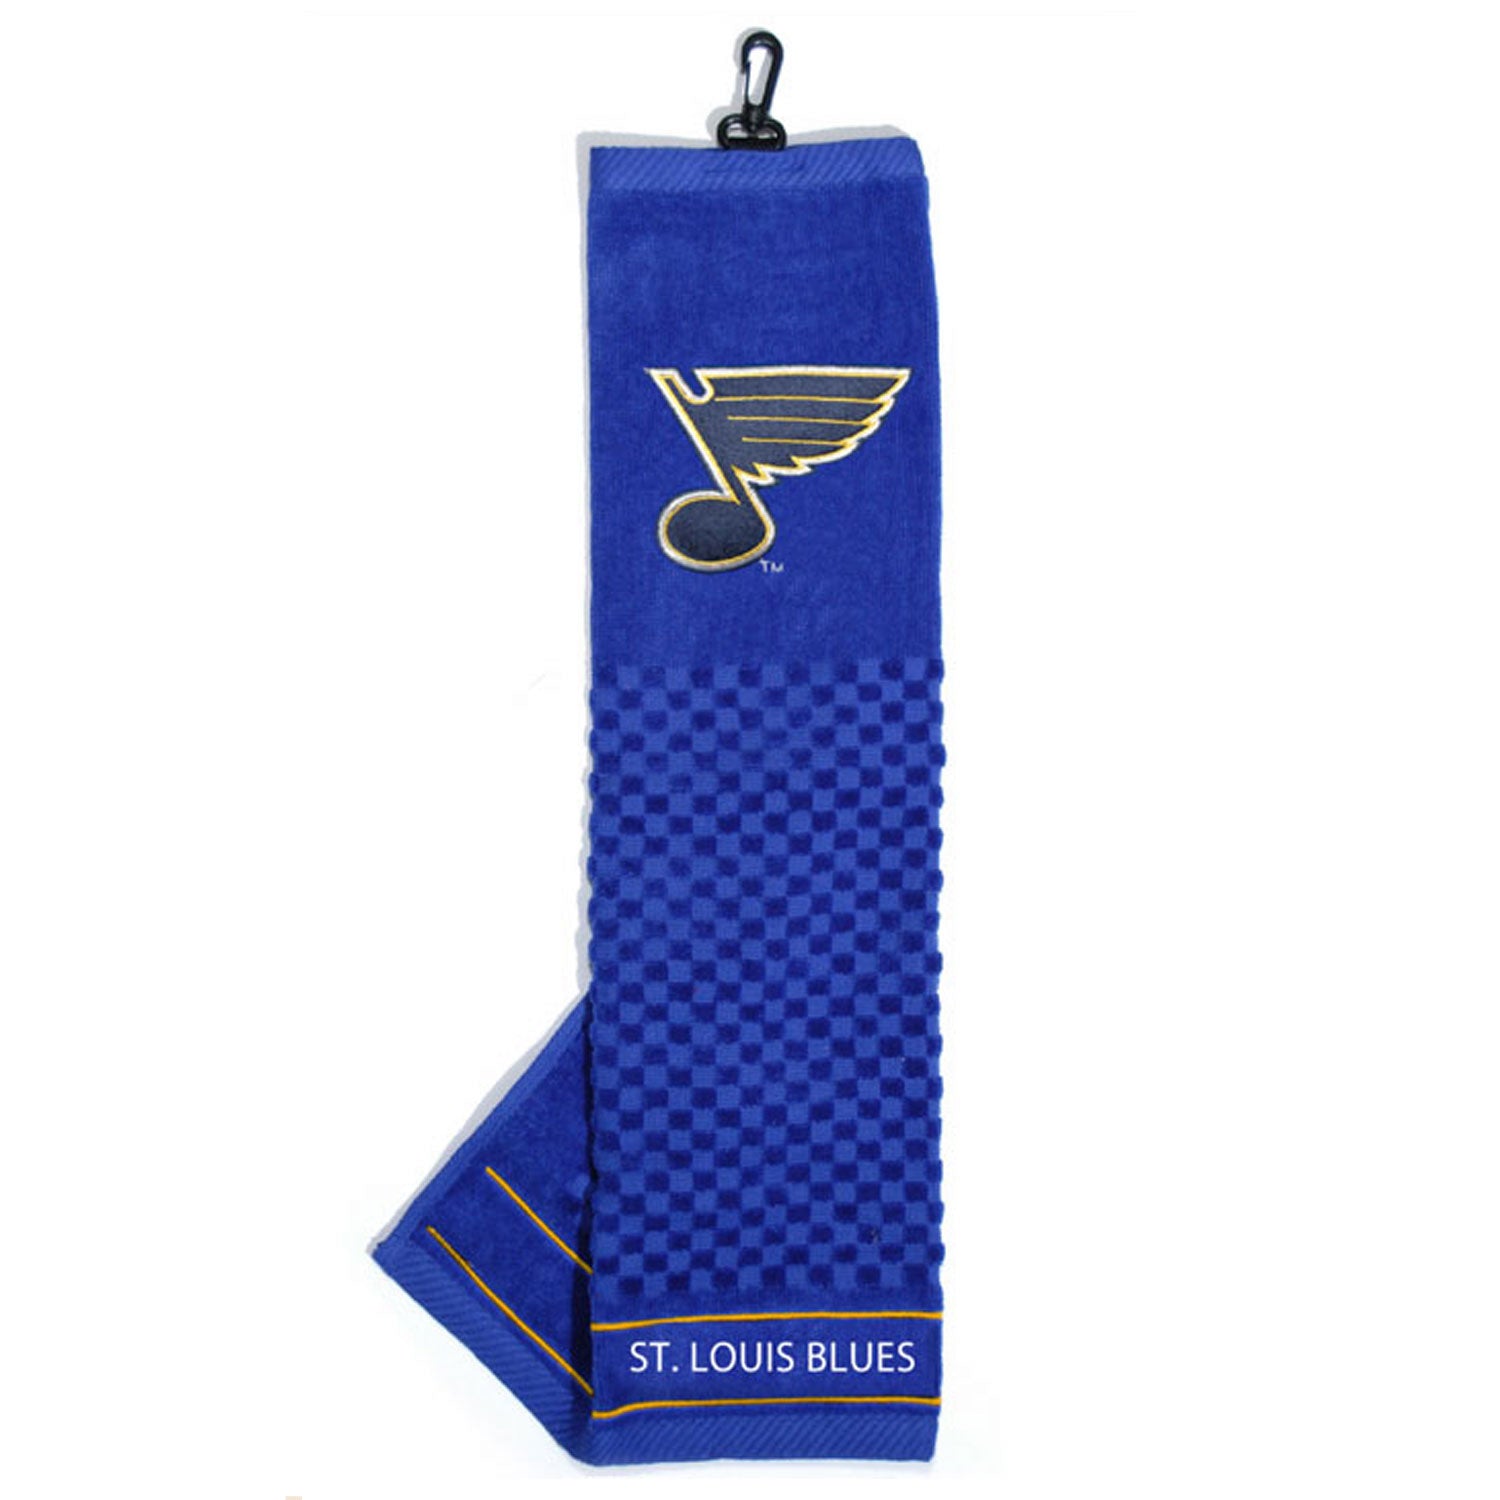 St. Louis Blues Embroidered Towel